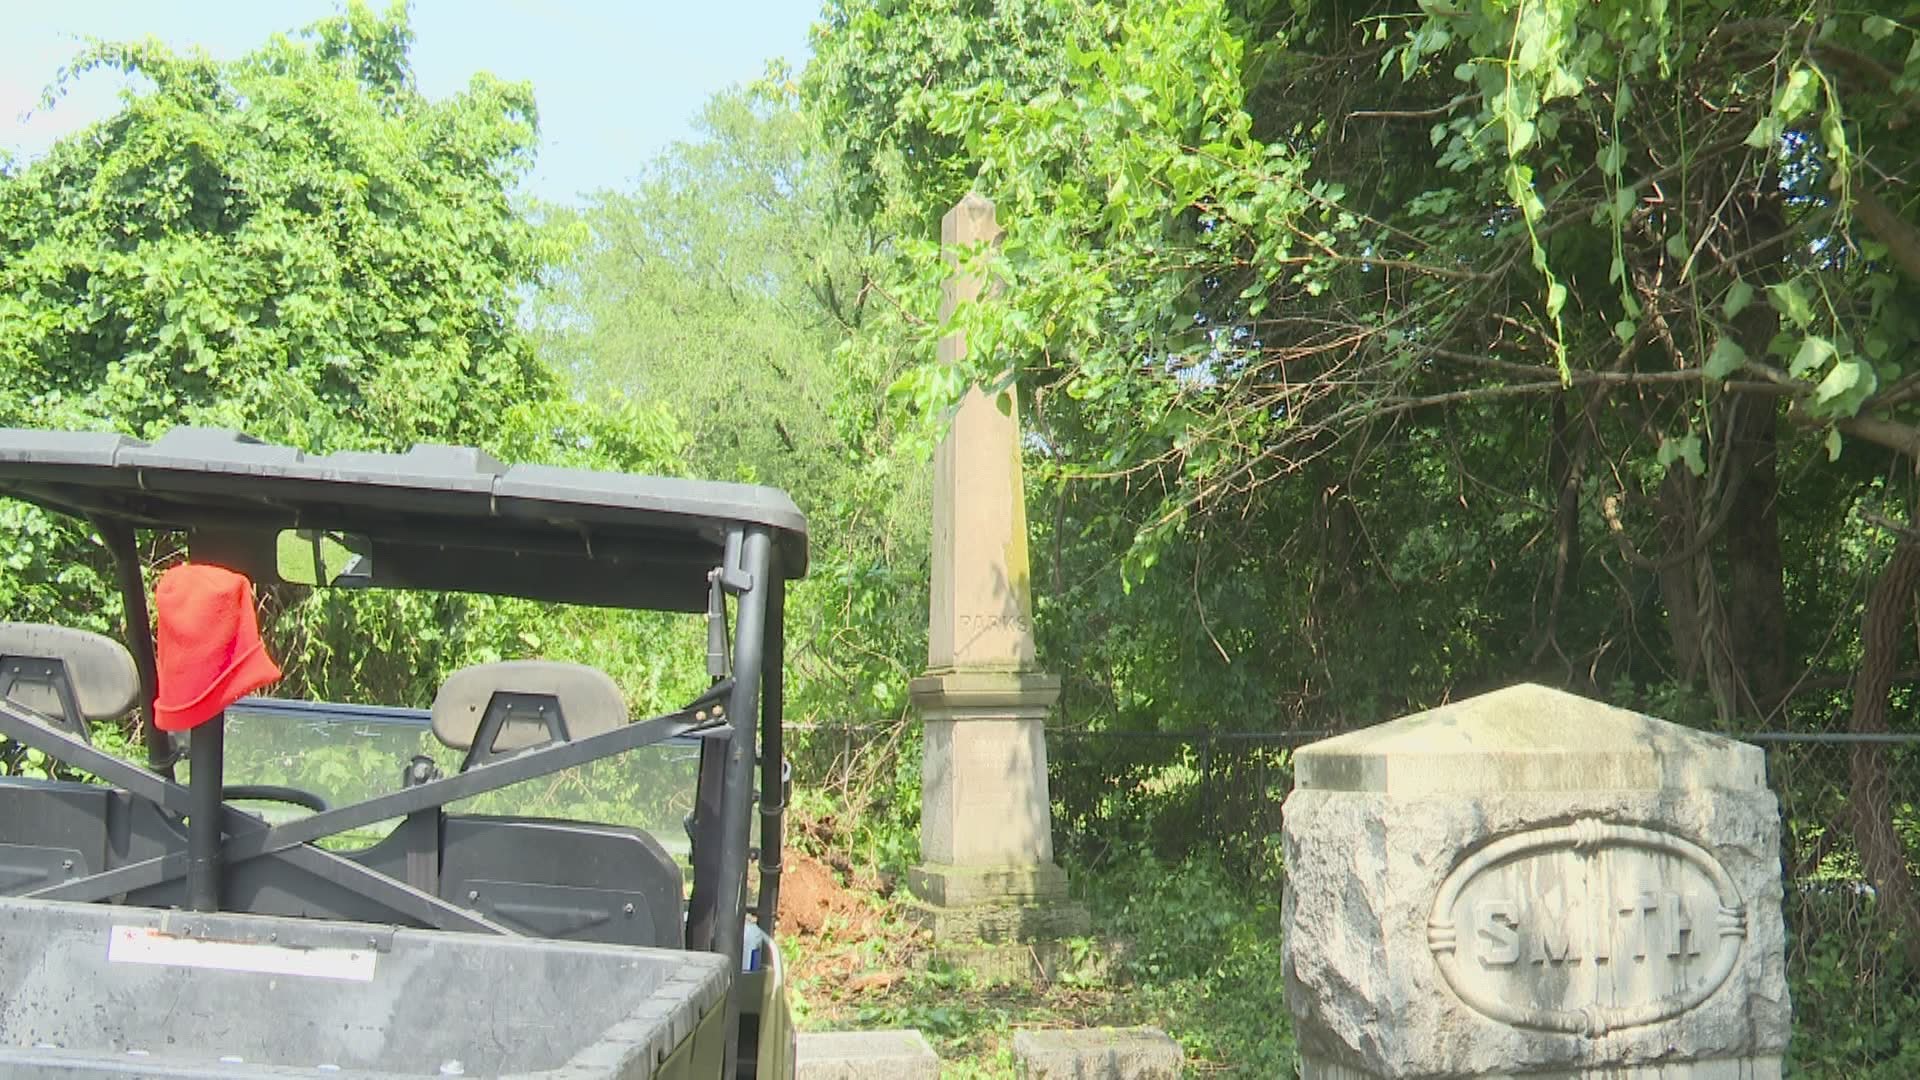 Volunteers and people needing community service came together in Utica to improve the Hillcrest Cemetery as weeds and trees took over headstones.